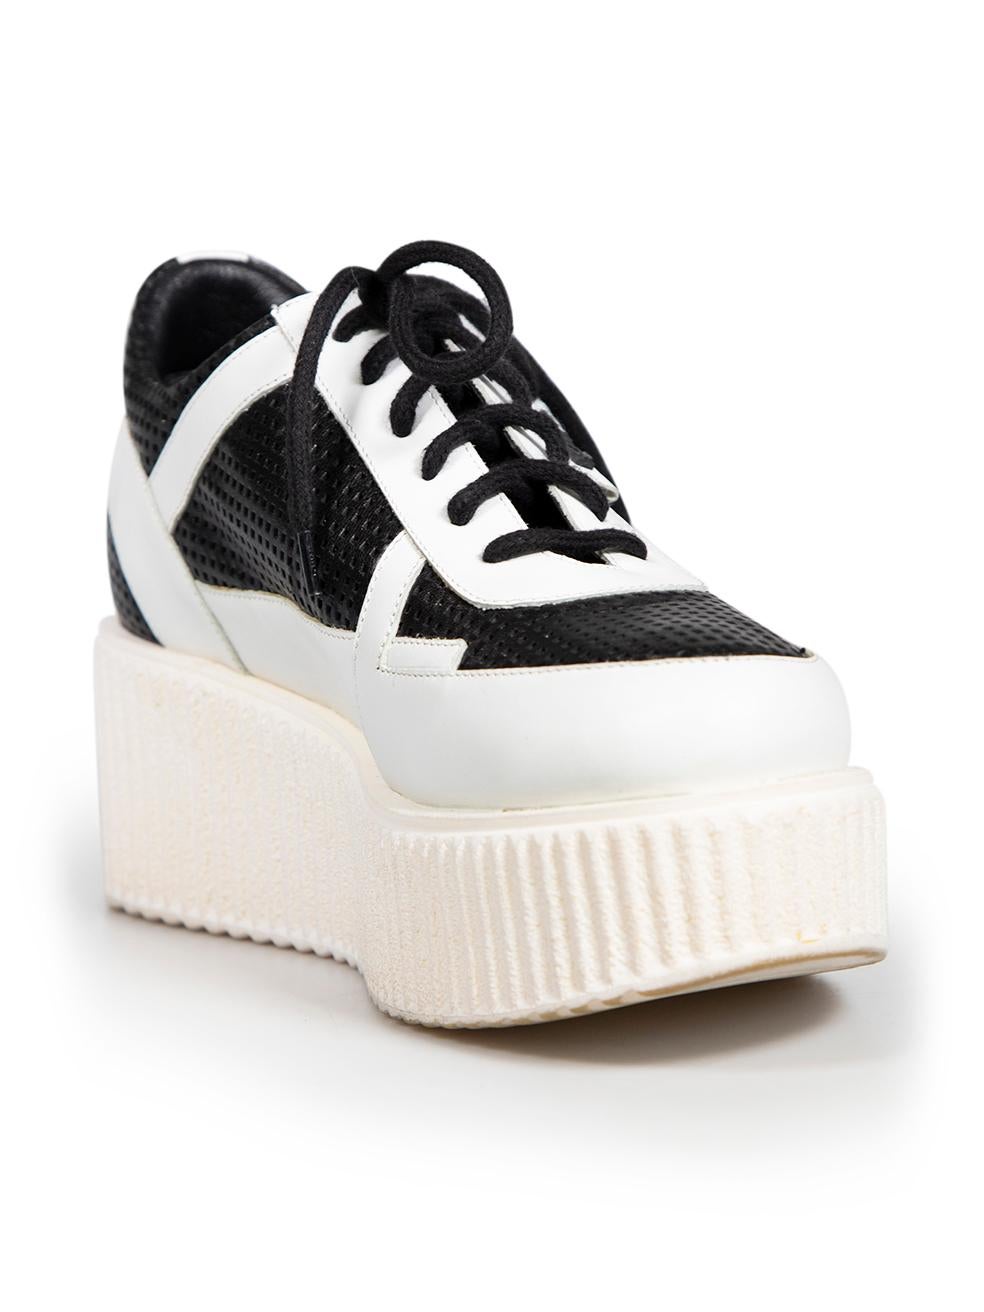 CONDITION is Very good. Minimal wear to trainers is evident. Minimal wear to soles and outsoles on this used Karl Lagerfeld designer resale item.
 
 
 
 Details
 
 
 Black
 
 Leather
 
 Trainers
 
 Low top
 
 White leather trim
 
 Chunky sole
 
